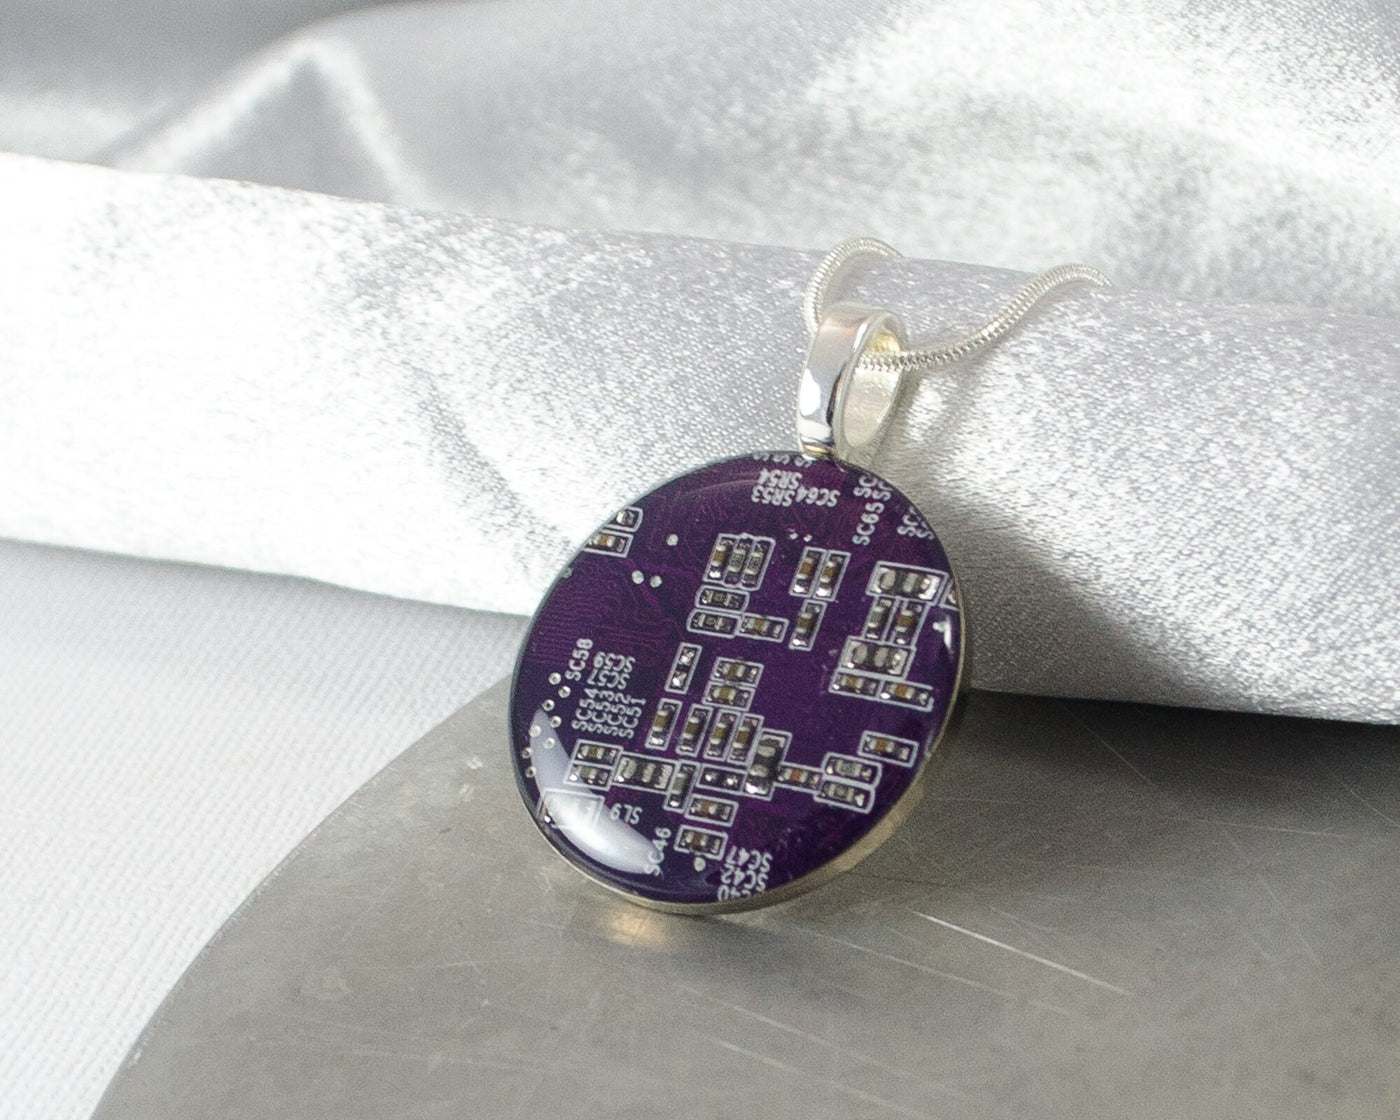 Purple Circuit Board Necklace LARGE, Recycled Motherboard Jewelry